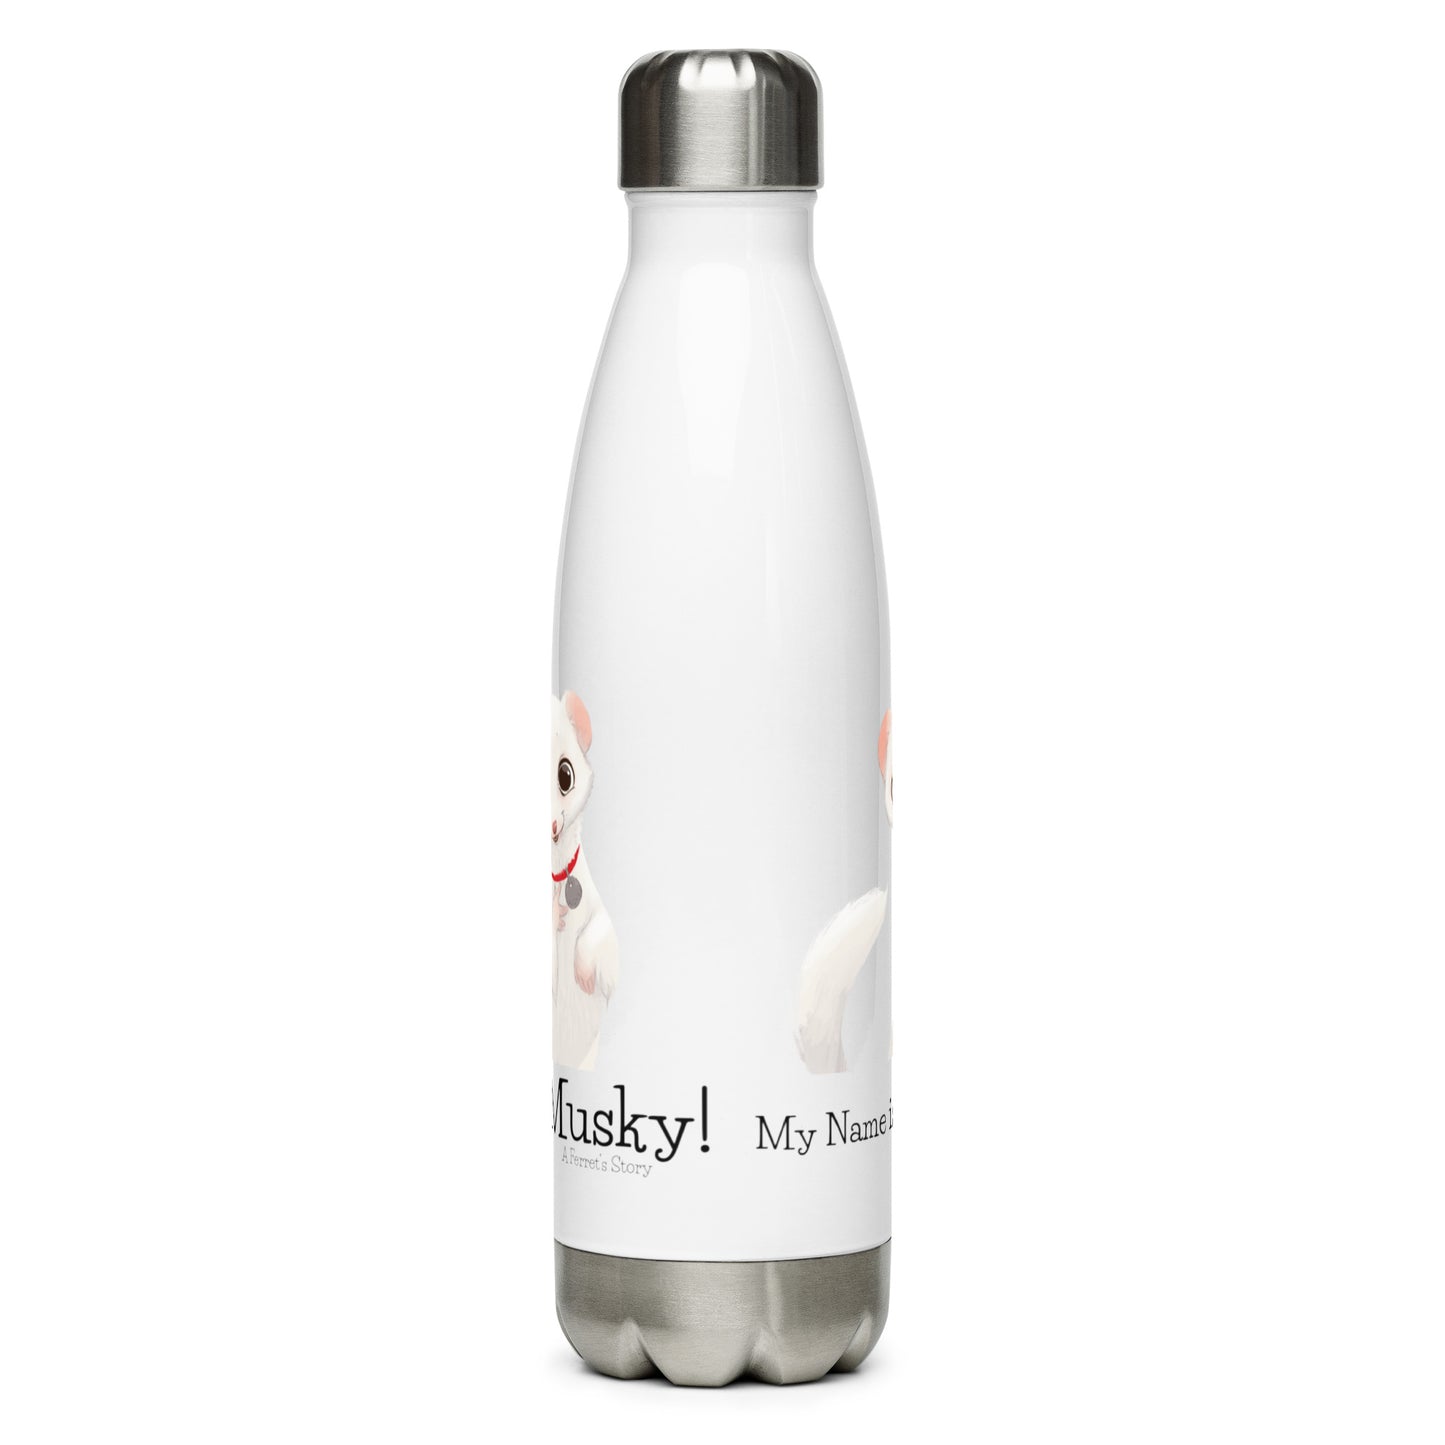 "My Name is Musky! A Ferret's Story" Stainless Steel Wawa Bottle!